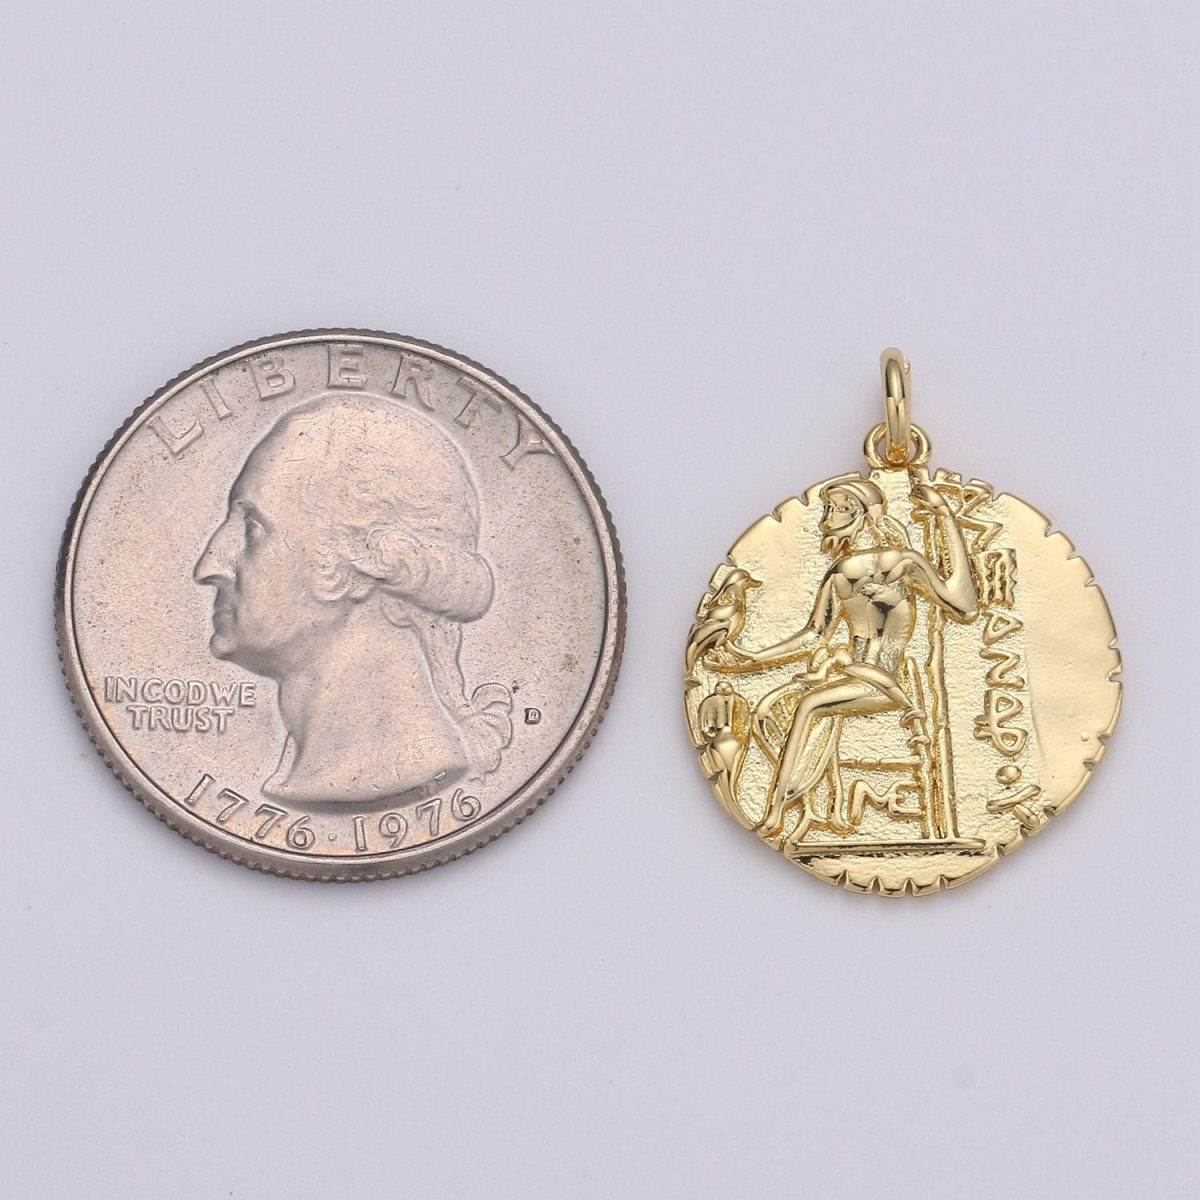 14k Gold Filled Ancient Gold Coin Pendant, Greek Warrior Alexander the Great Coin Pendant, Earing DIY, Roman Coin Pendant, Earing Coin D-151 - DLUXCA